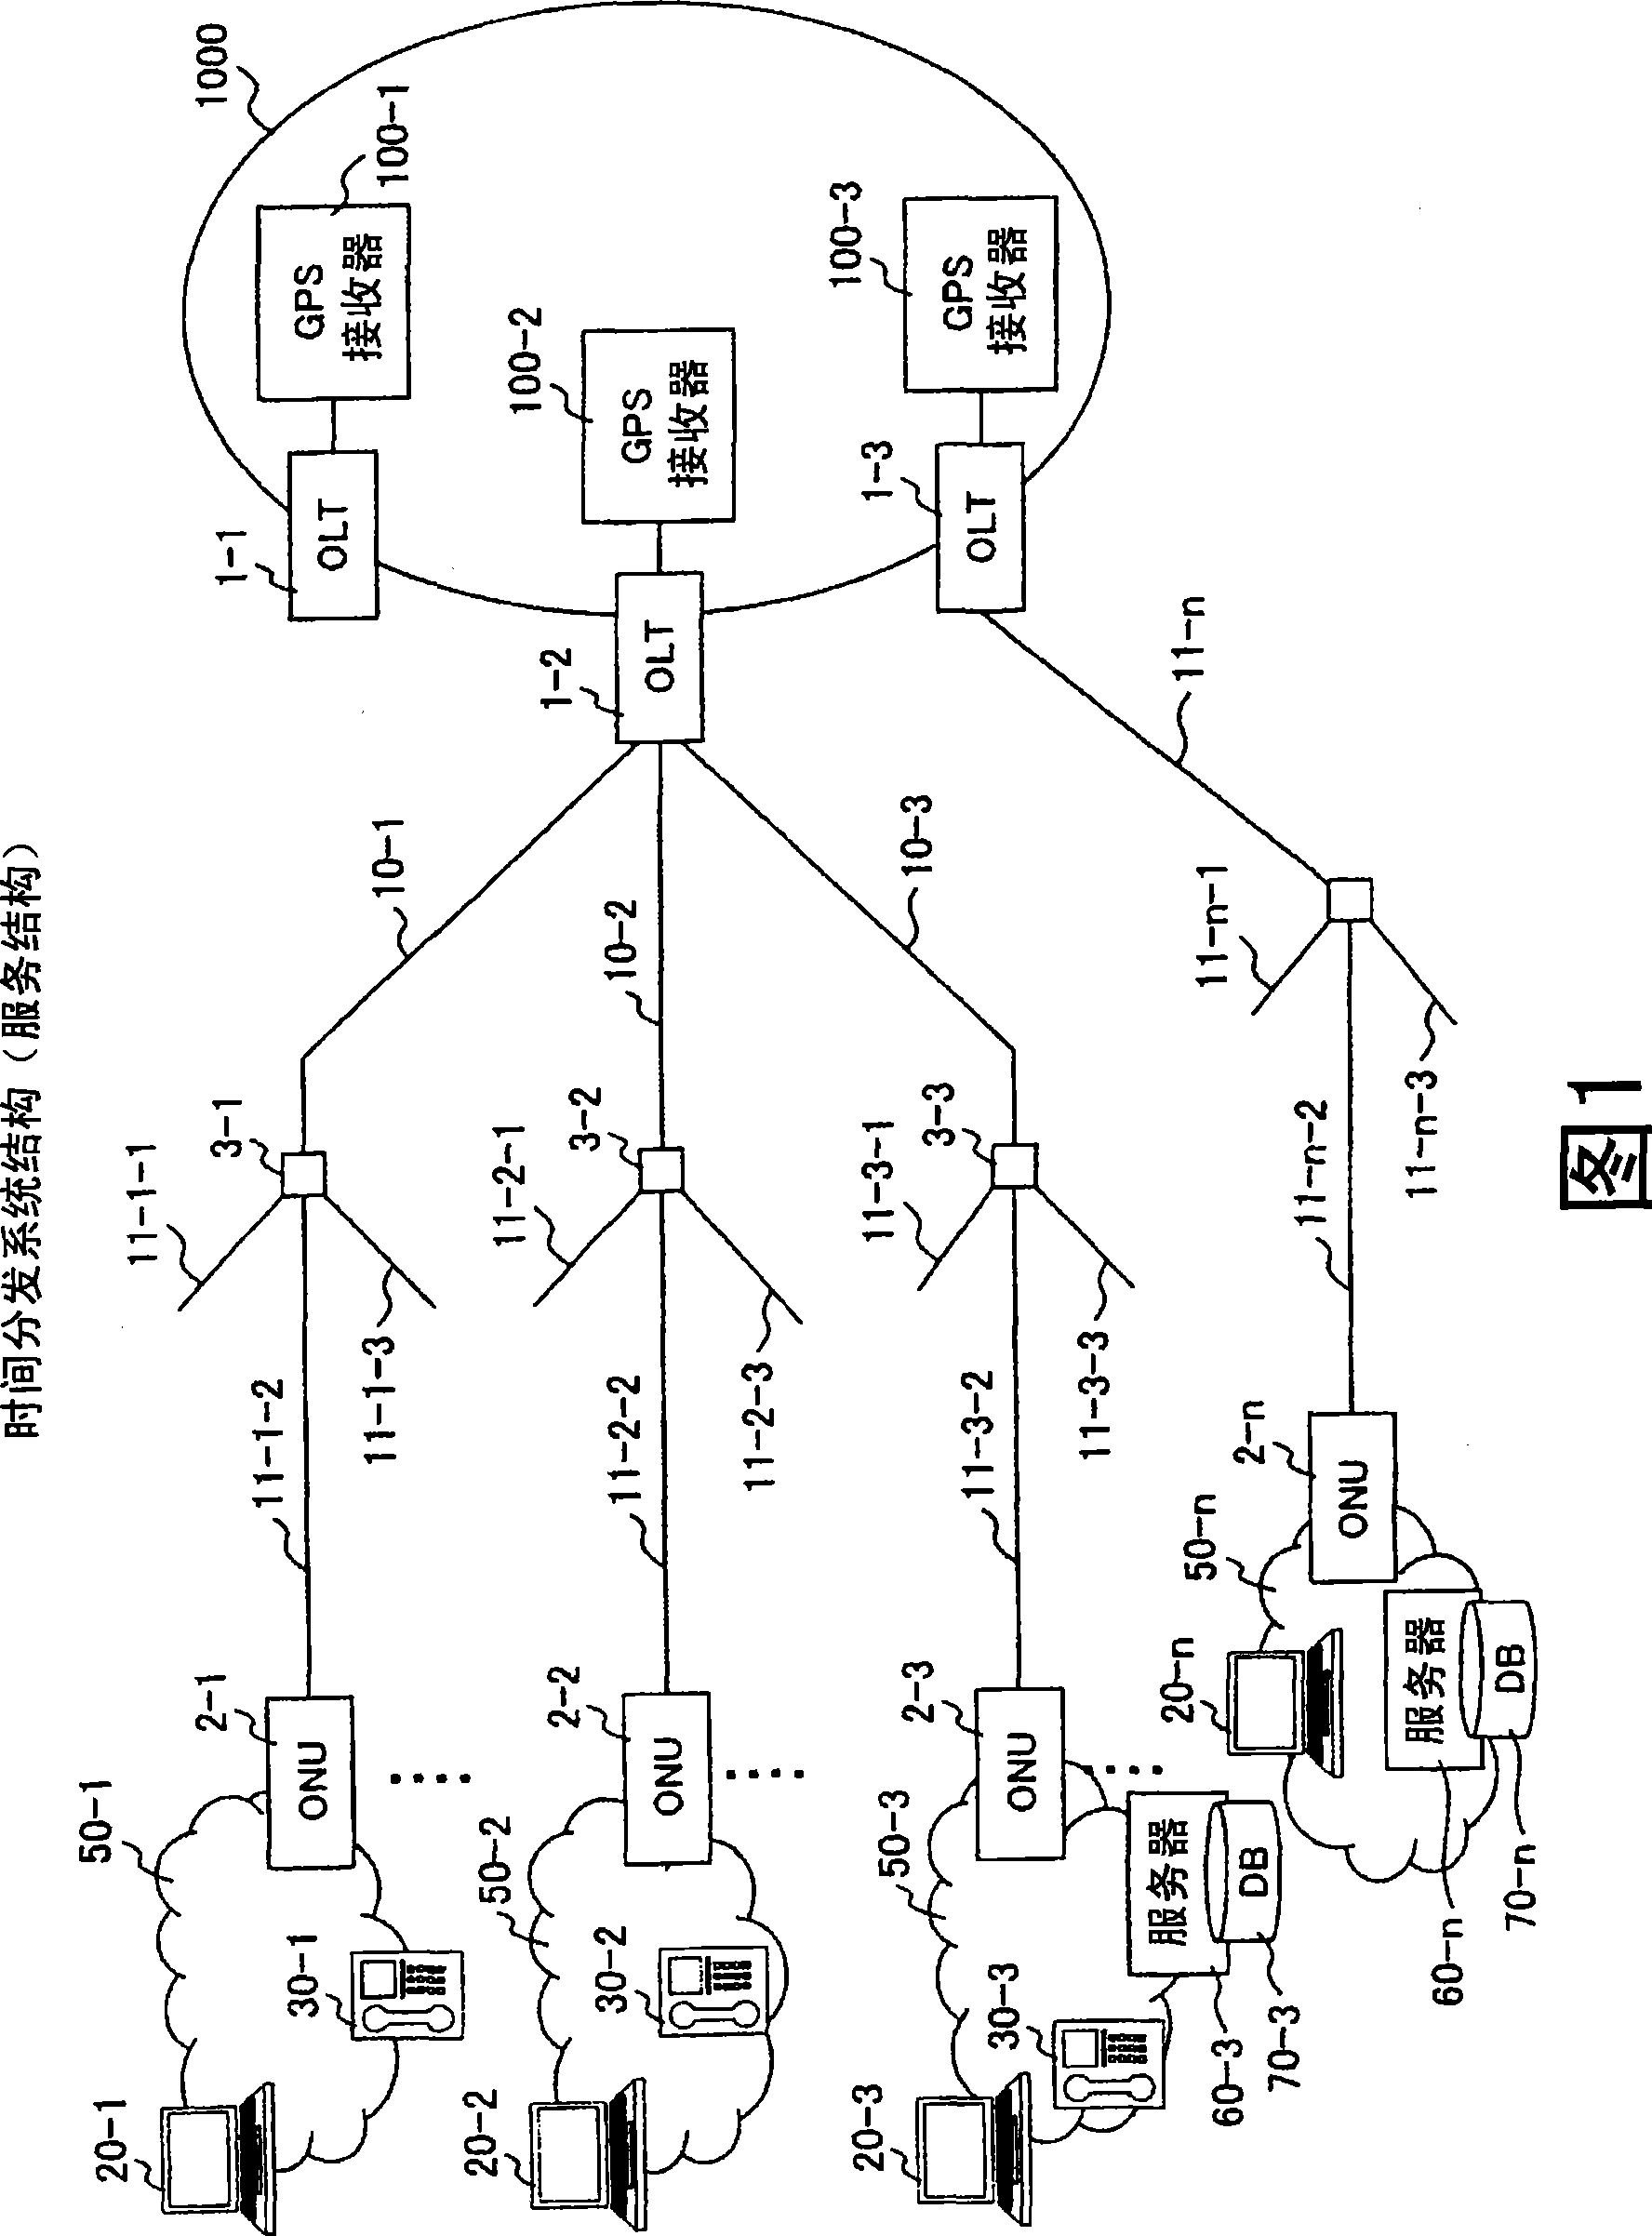 Communication system and its device